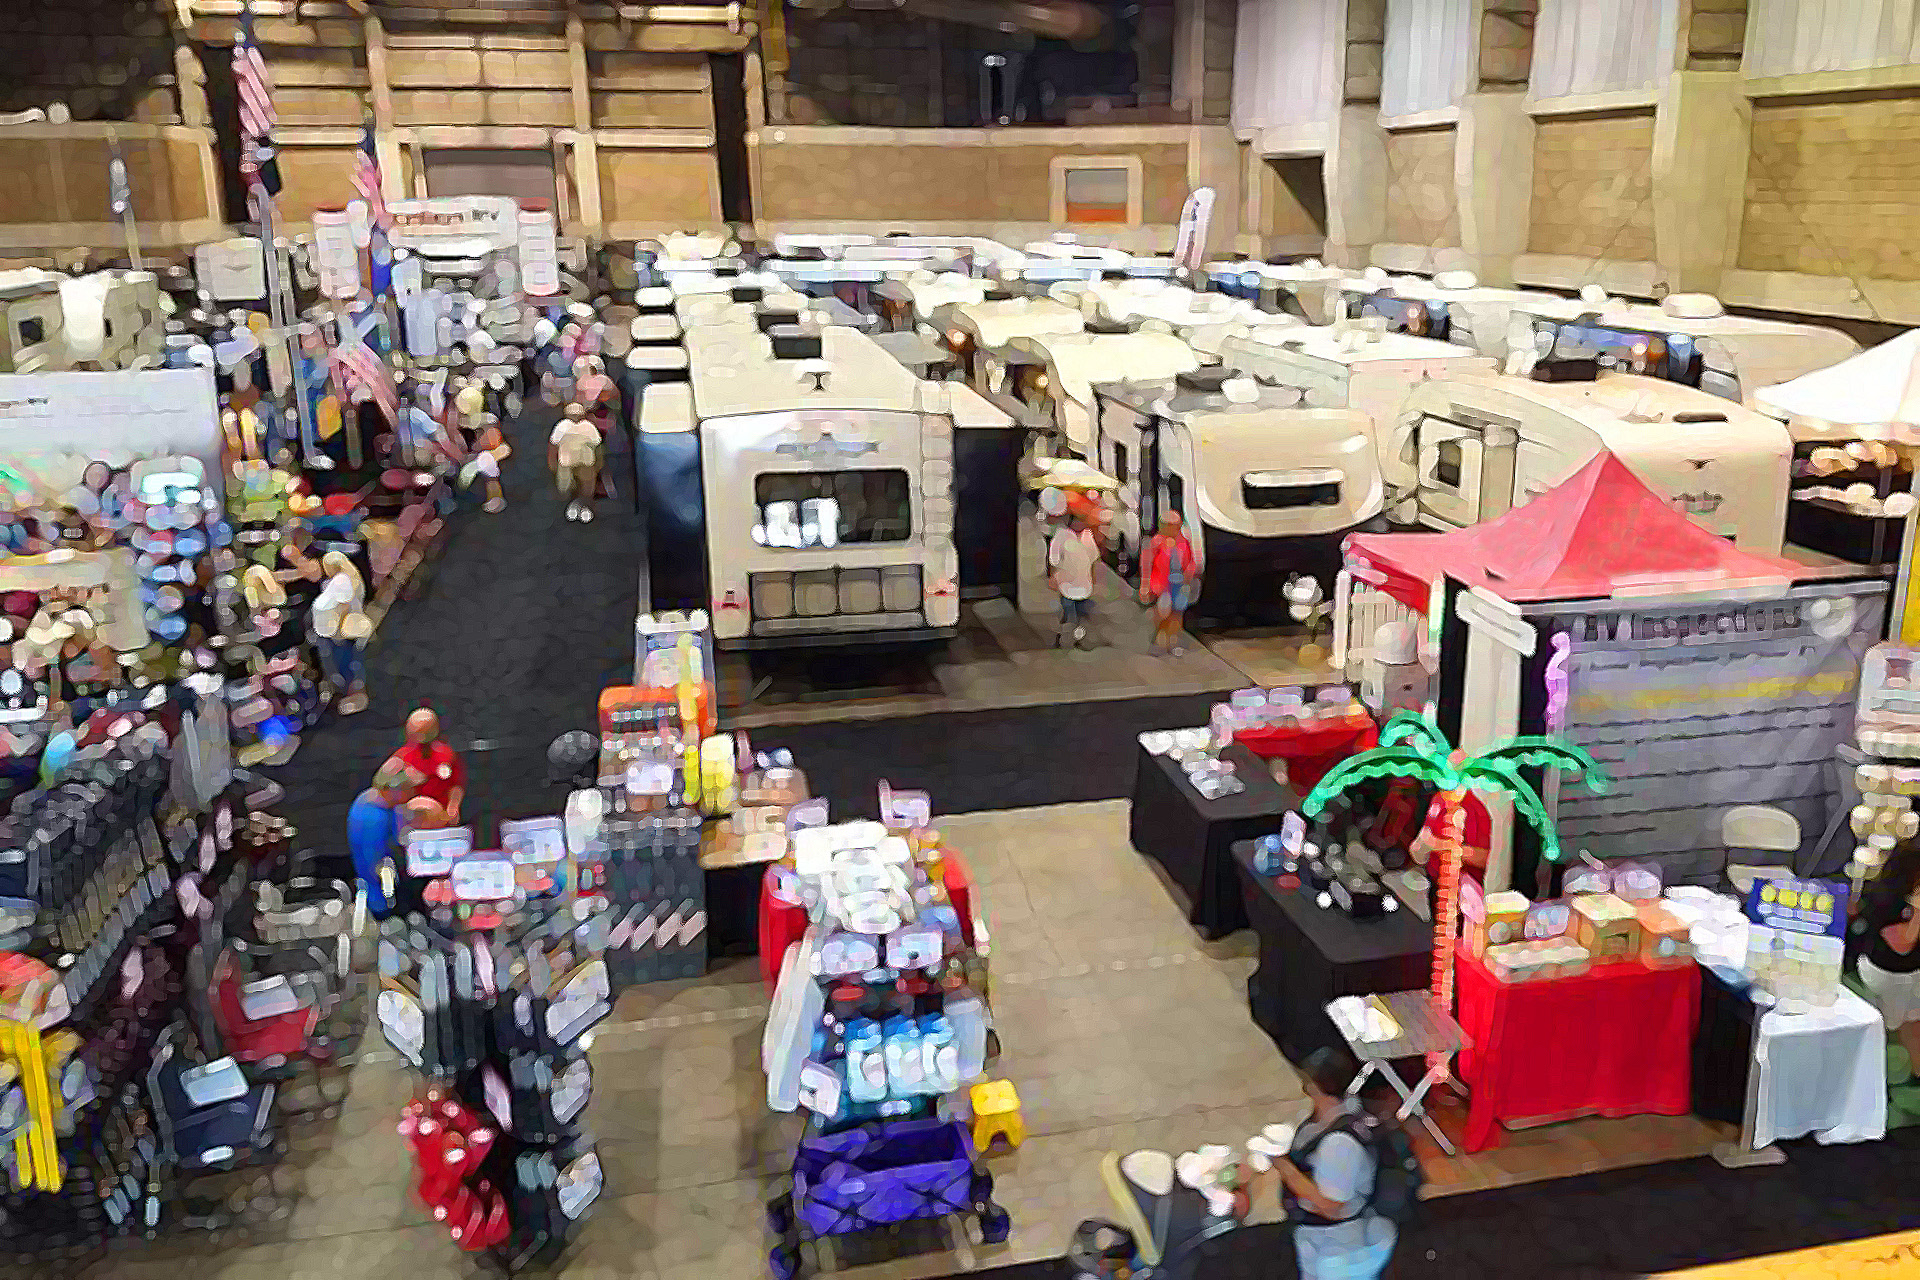 Knoxville RV Show is undergoing maintenance